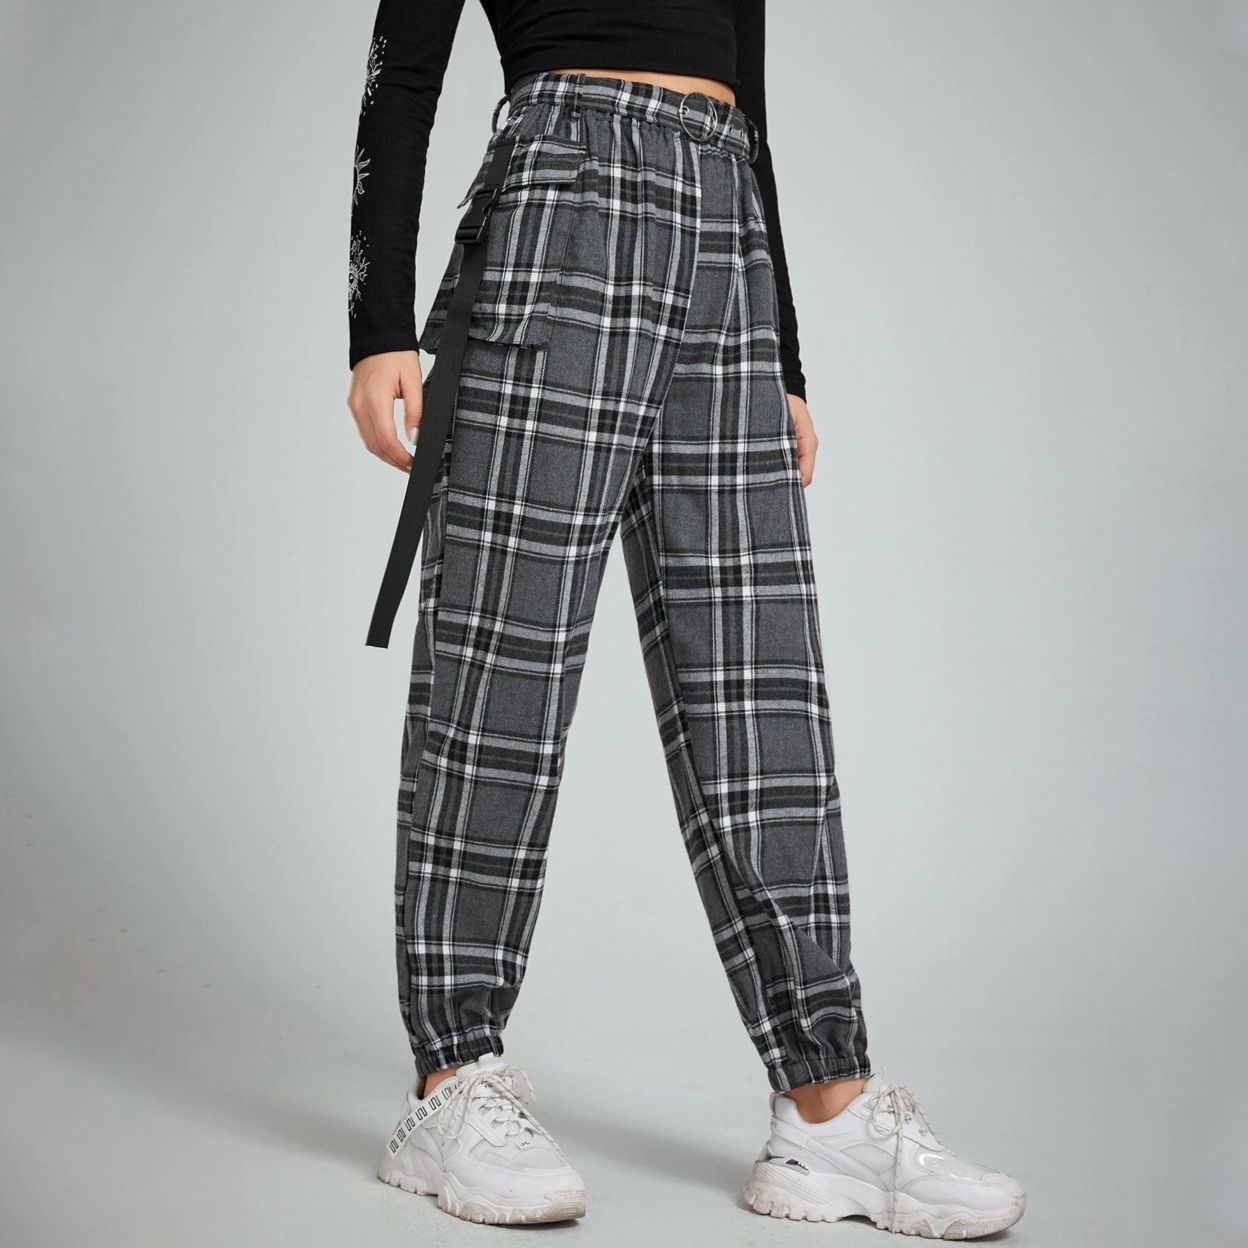 Belted Plaid Joggers - M